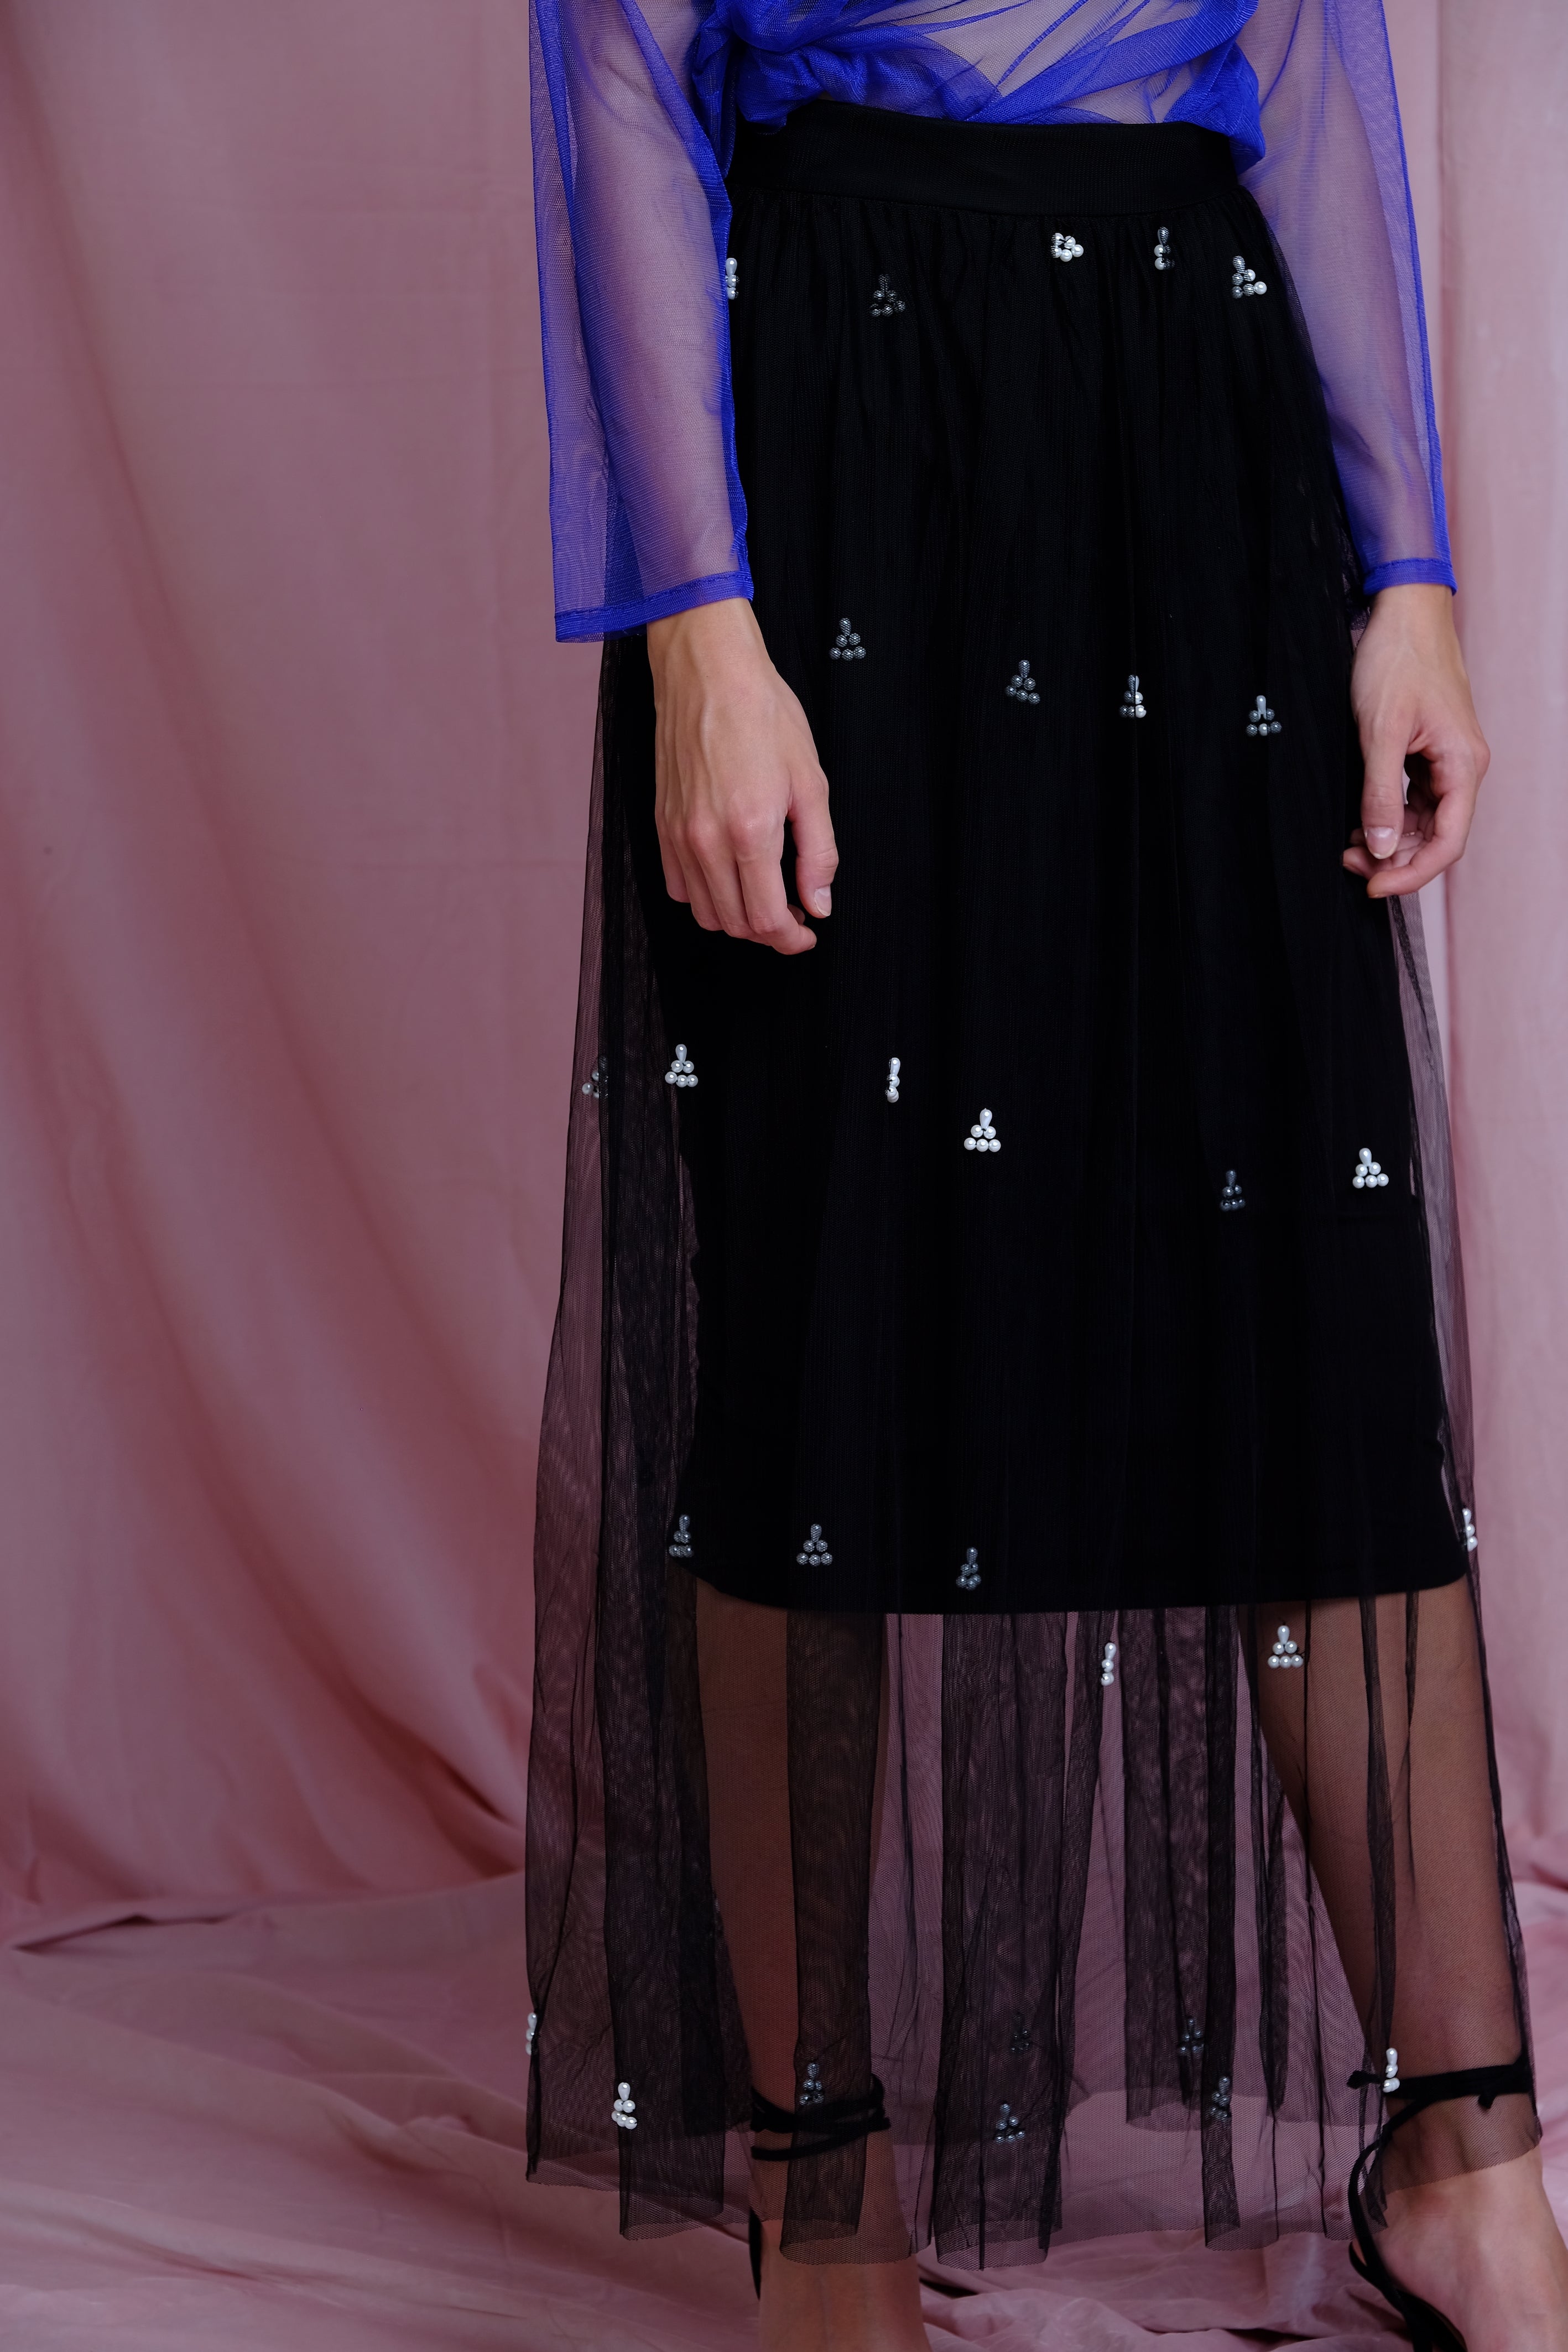 Black Tulle Skirt With Pearls